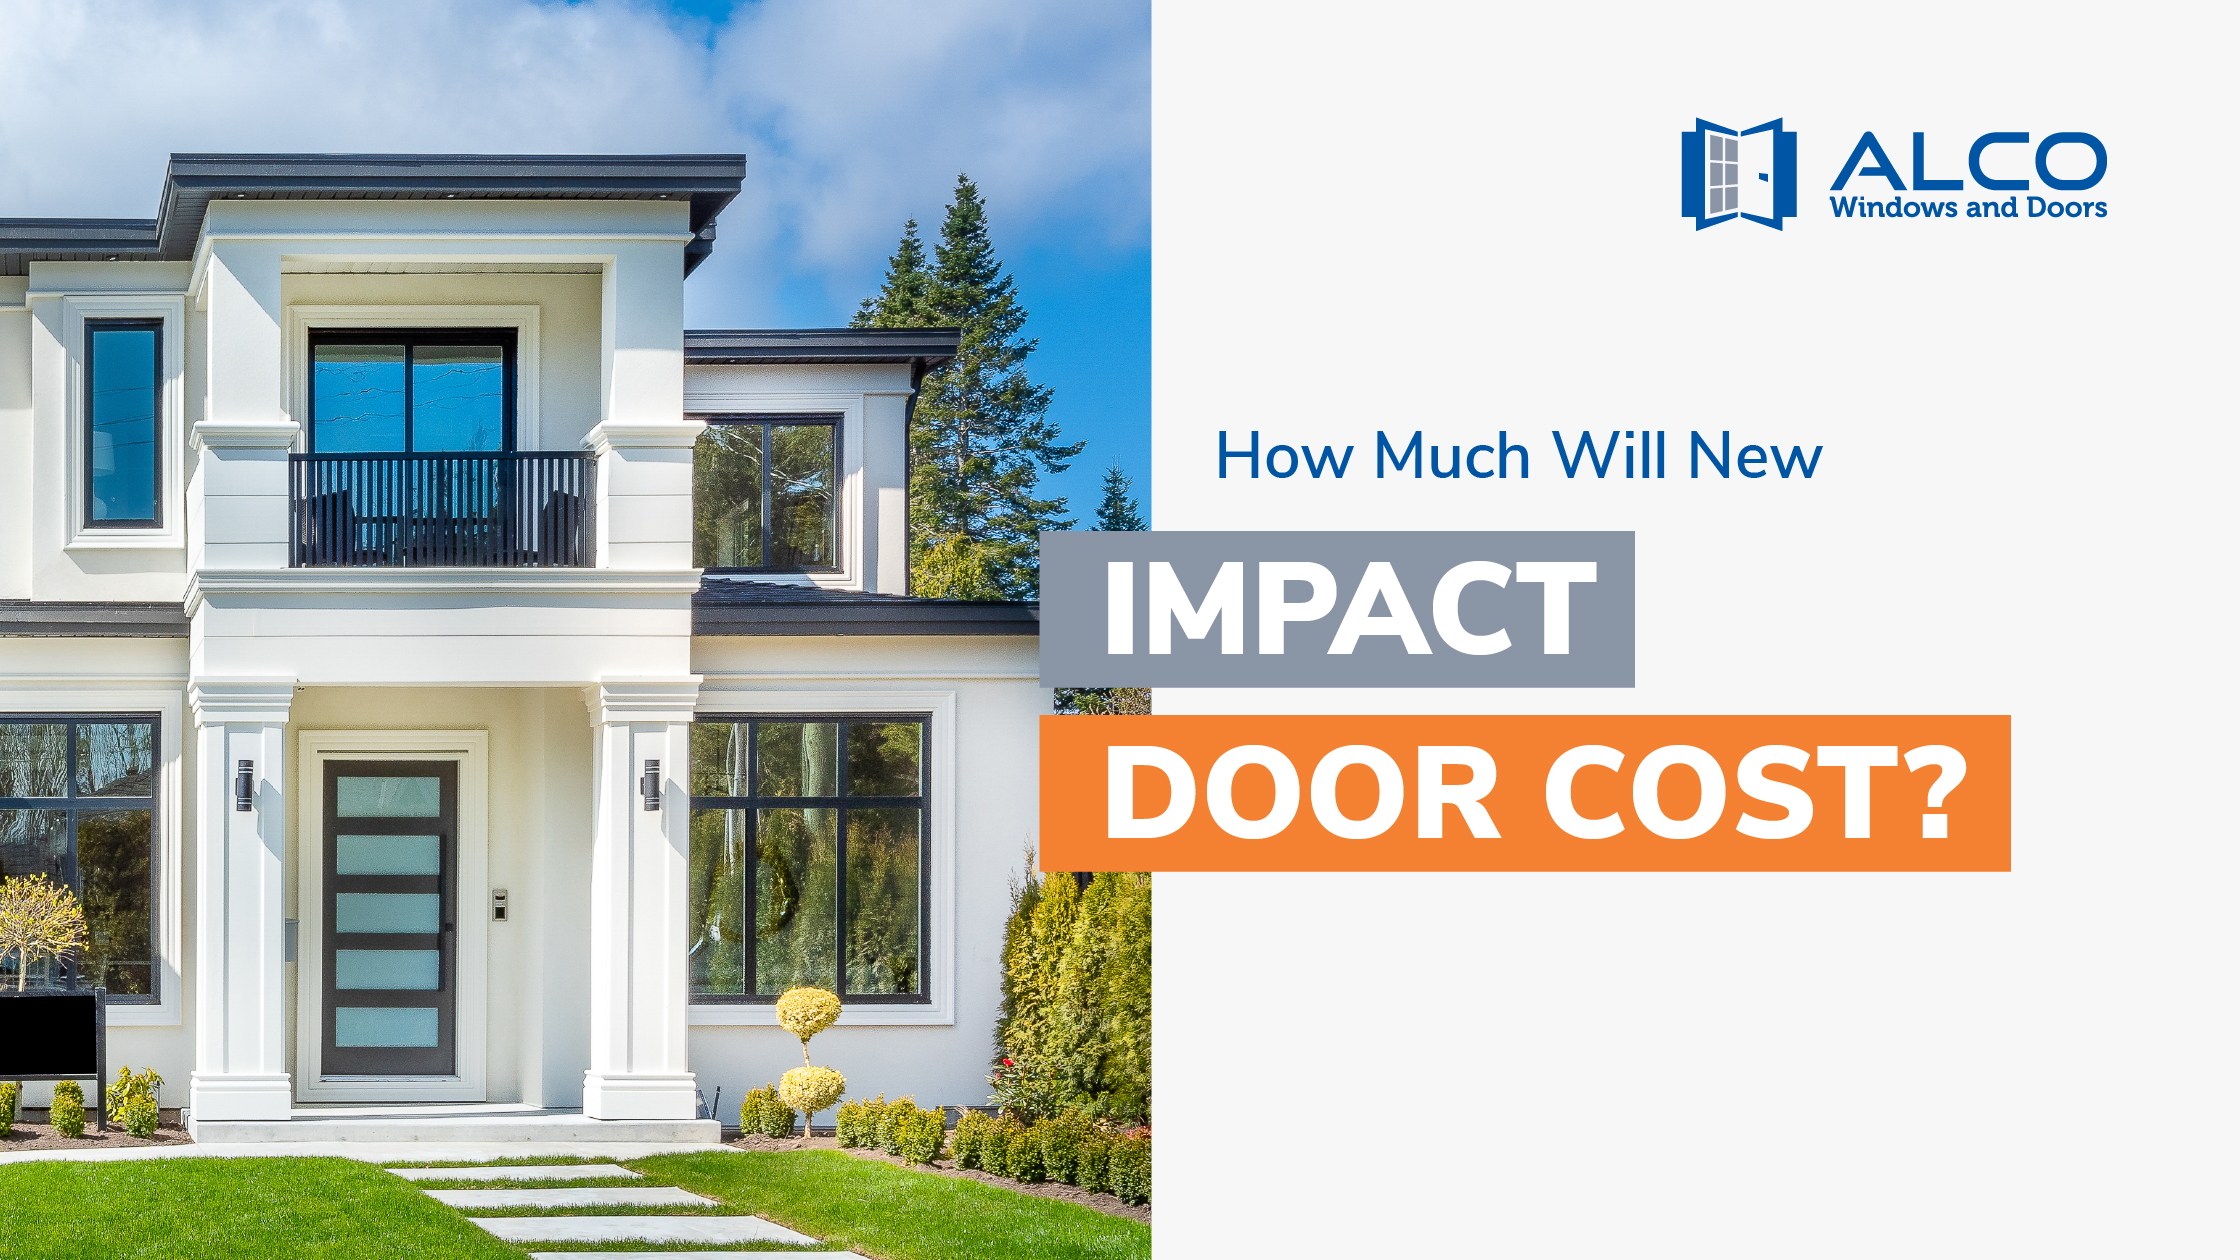 How Much Will New Impact Doors Cost?